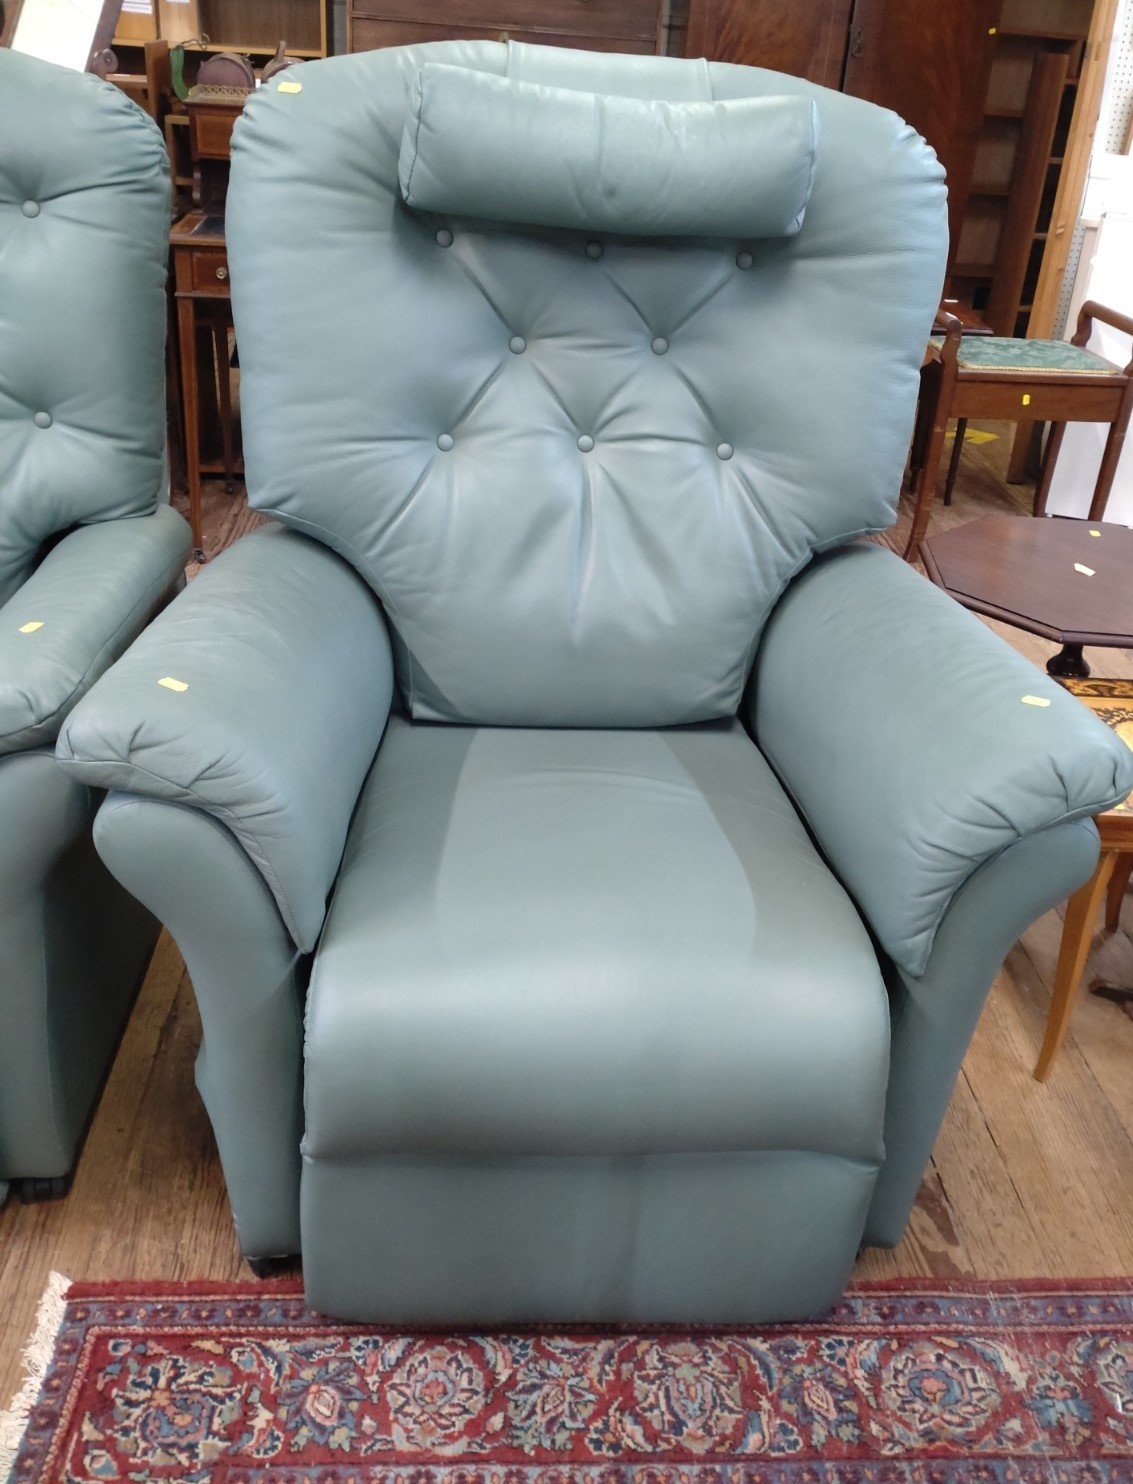 A green electric recliner armchair with fire label.